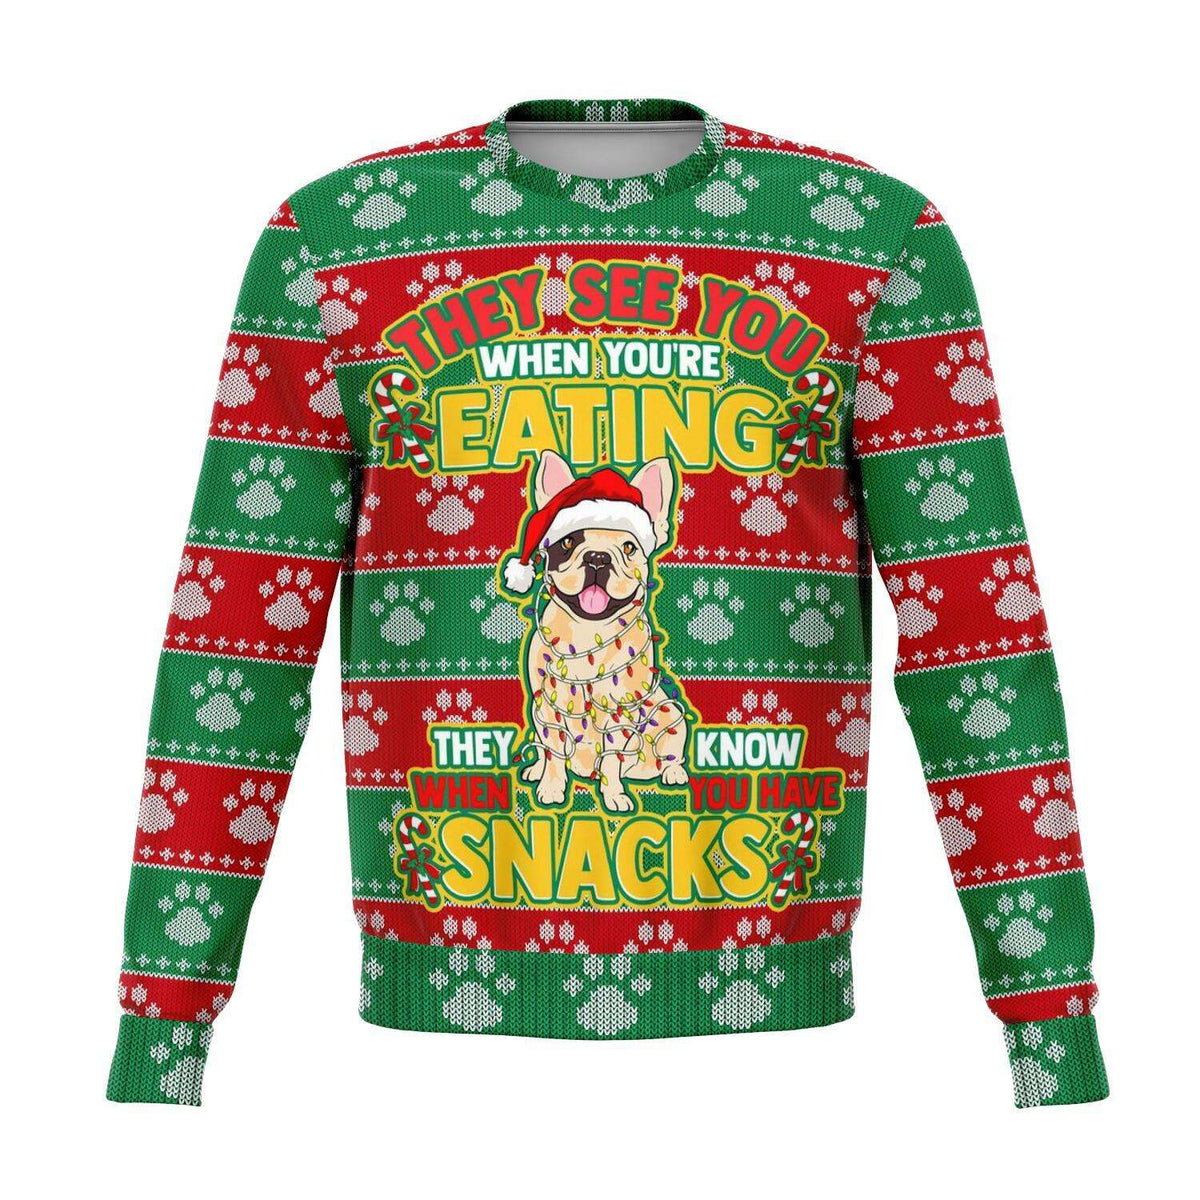 Designs by MyUtopia Shout Out:They See You When You're Eating Snacks French Bulldog - 3D Ugly Christmas Holiday Fashion Sweatshirt,XS / Multi,Fashion Sweatshirt - AOP